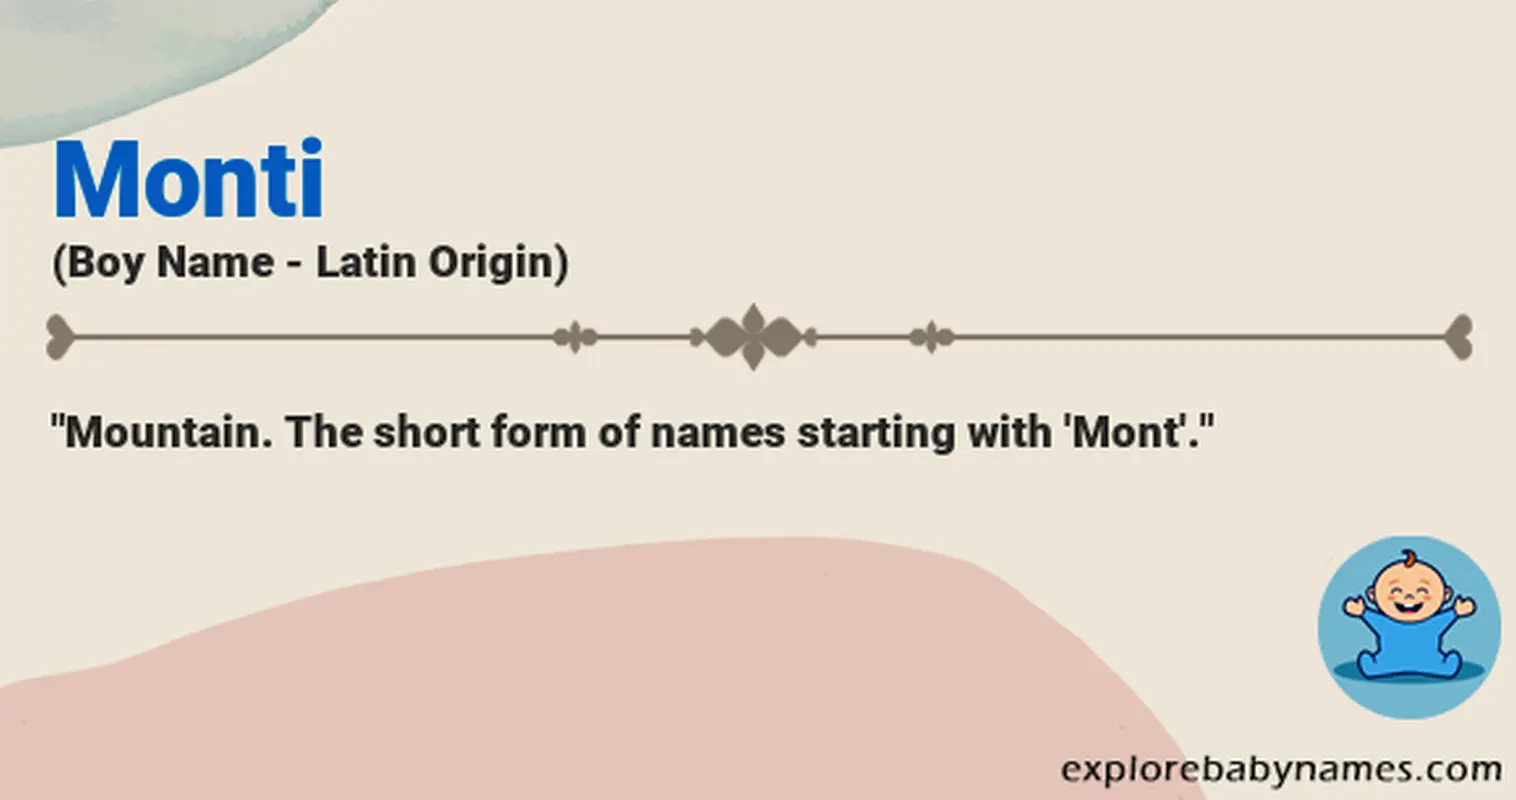 Meaning of Monti